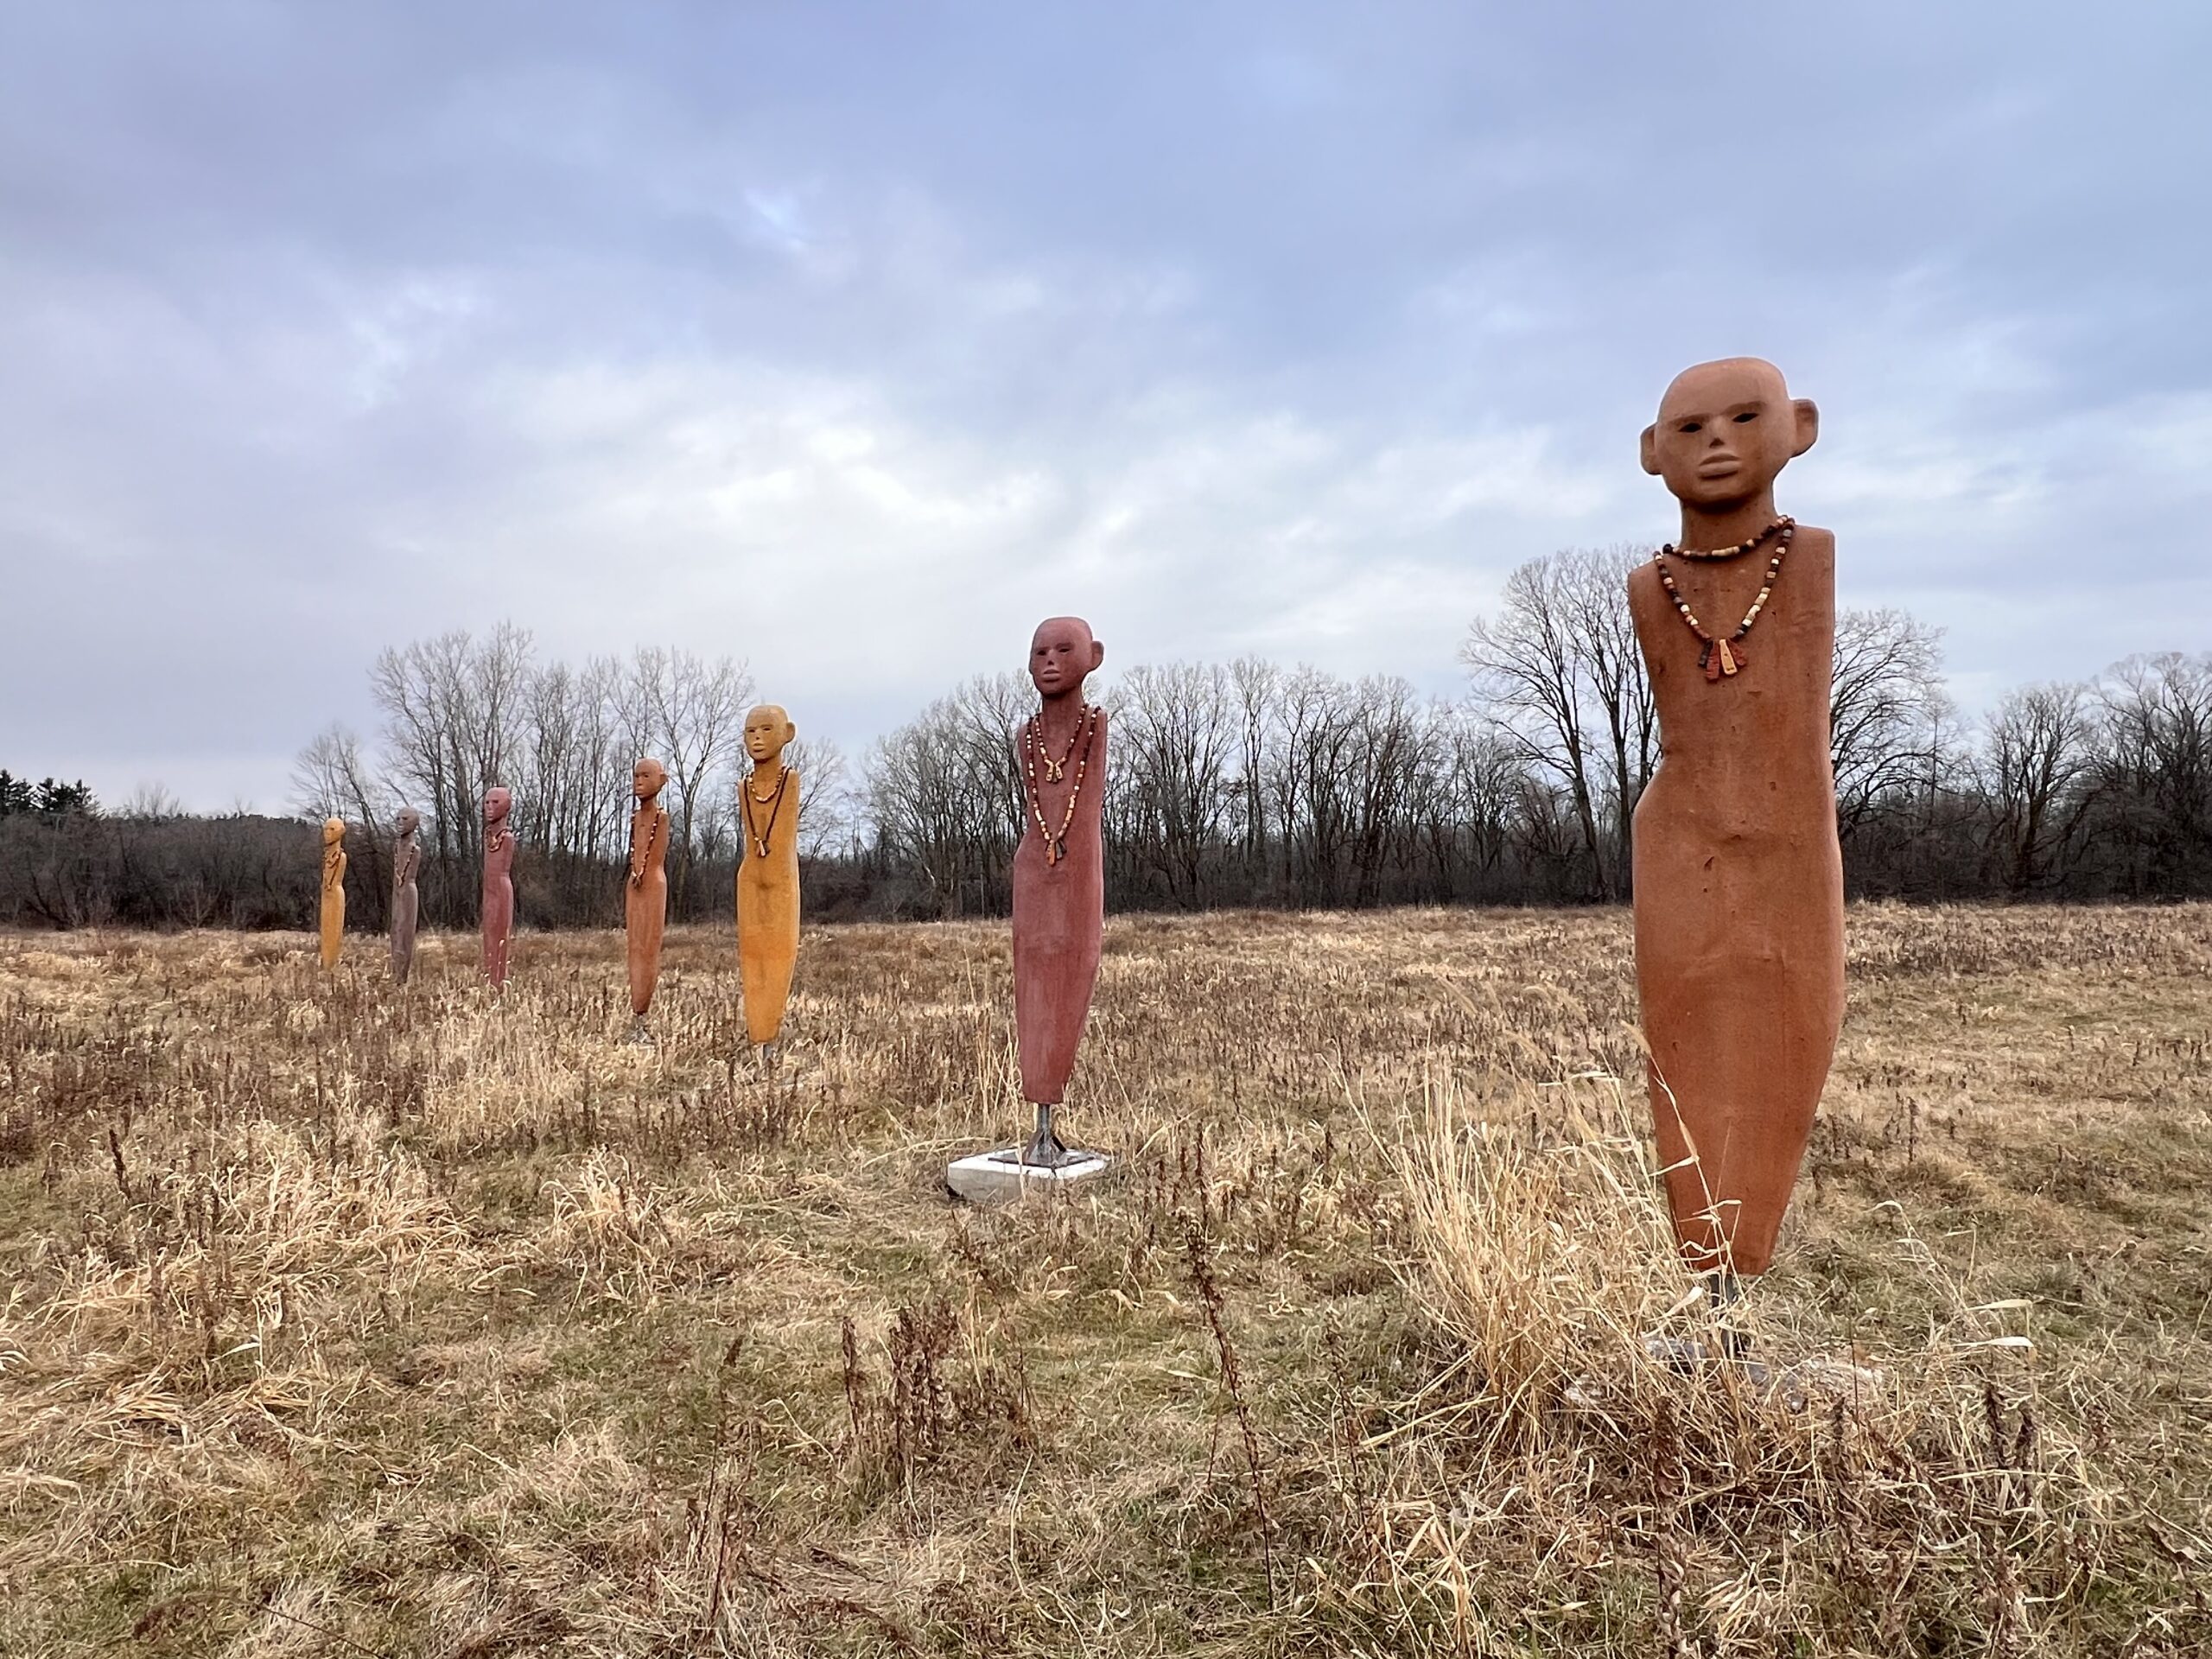 An outdoor field with seven figurative sculptural works that look like abstracted human forms in shades of reddish browns and yellows.